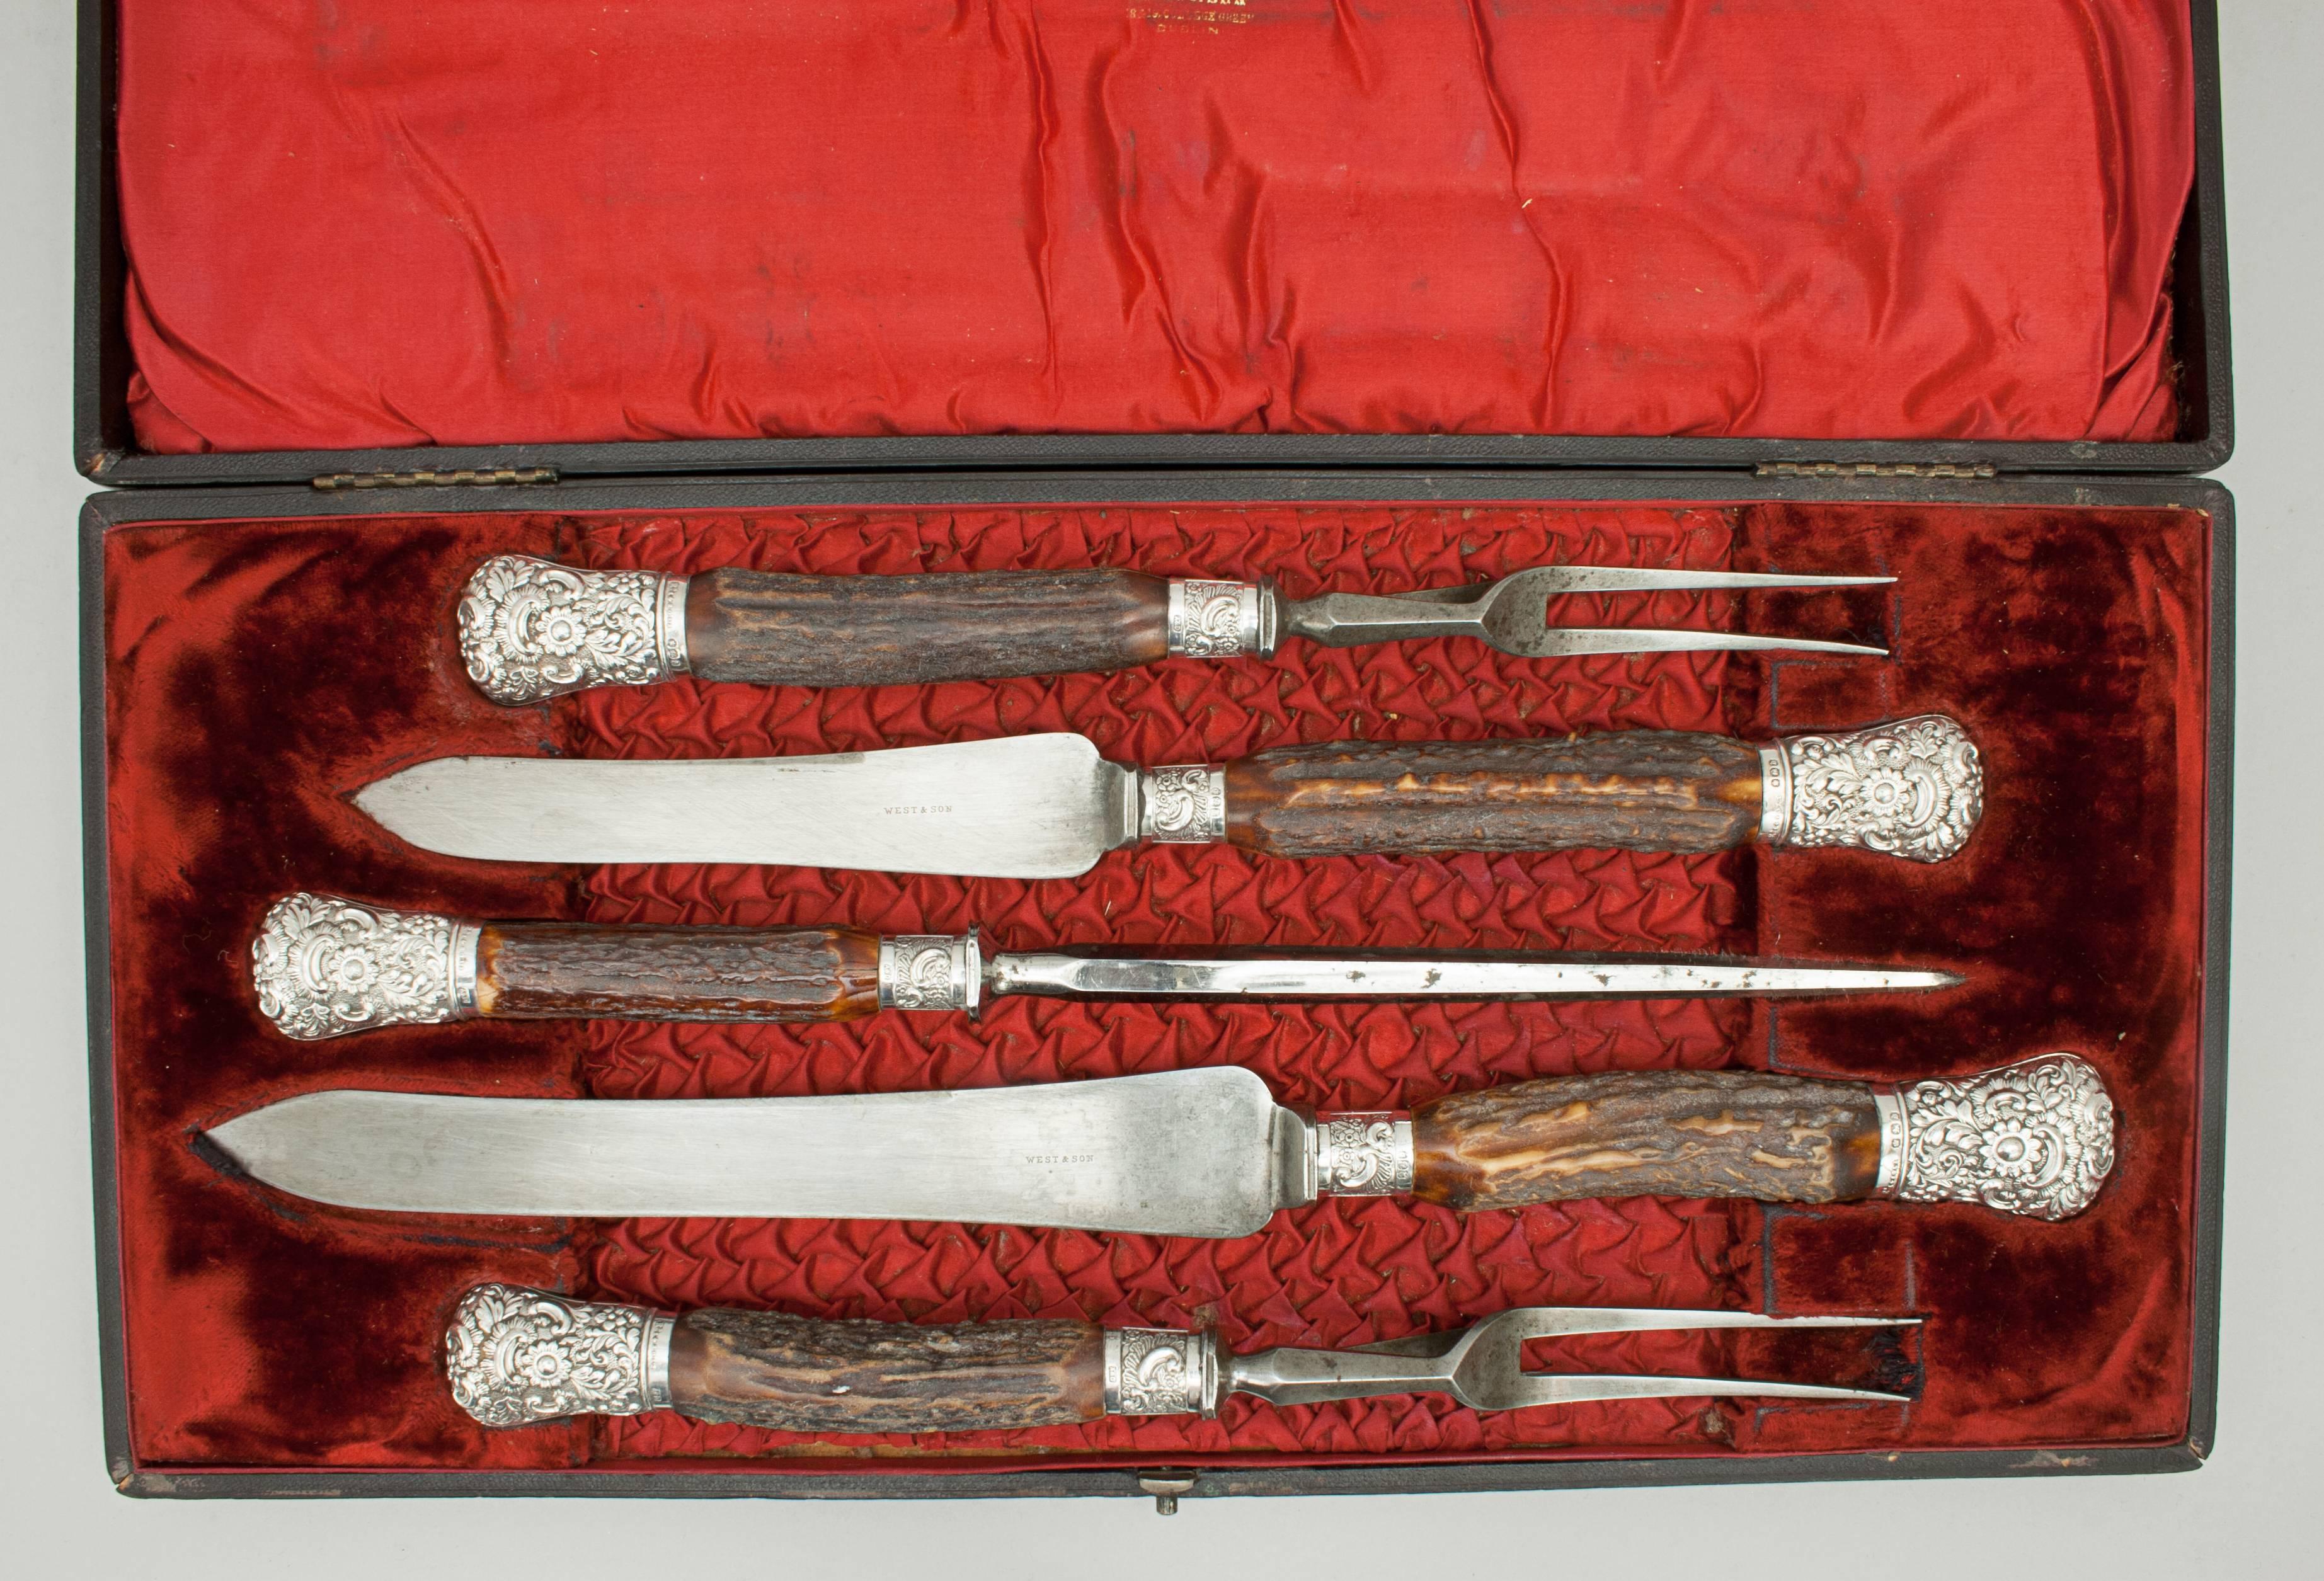 Late 19th Century Antique Silver and Antler Carving Set with Antler Handles